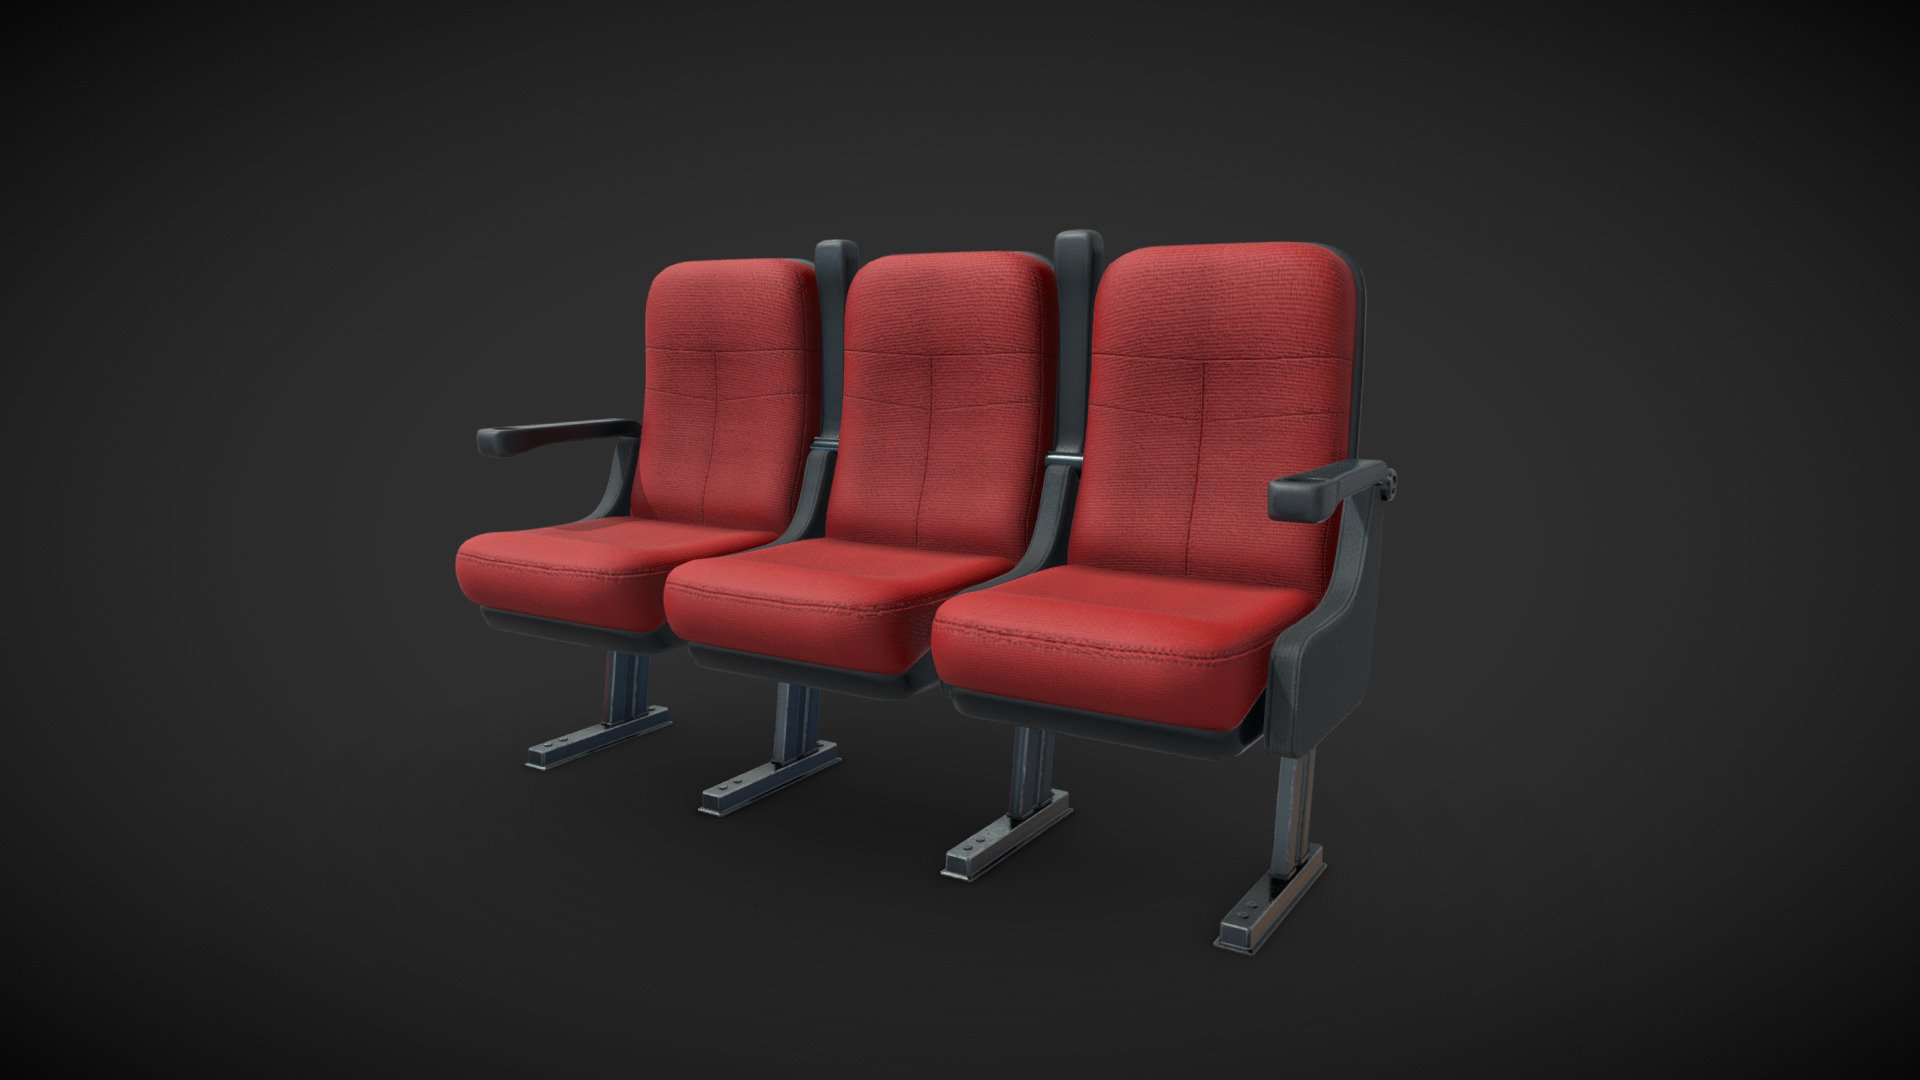 Cinema Armchairs

I made them in Blender 3D (modeling, scuplting, retopology, unwraping) and textured in Substance Painter.

I dropped down from 40 mln tris (bit overkill, my mistake) to 27k. Didnt went lower cuz wanted all curves looks nice and i was out of time. (for sure would be lower amount if put more time in it, topology isnt best for same reason) 

I was limited to use 1024x1024 textures only - Cinema Armchairs - 3D model by wlodarski3d 3d model